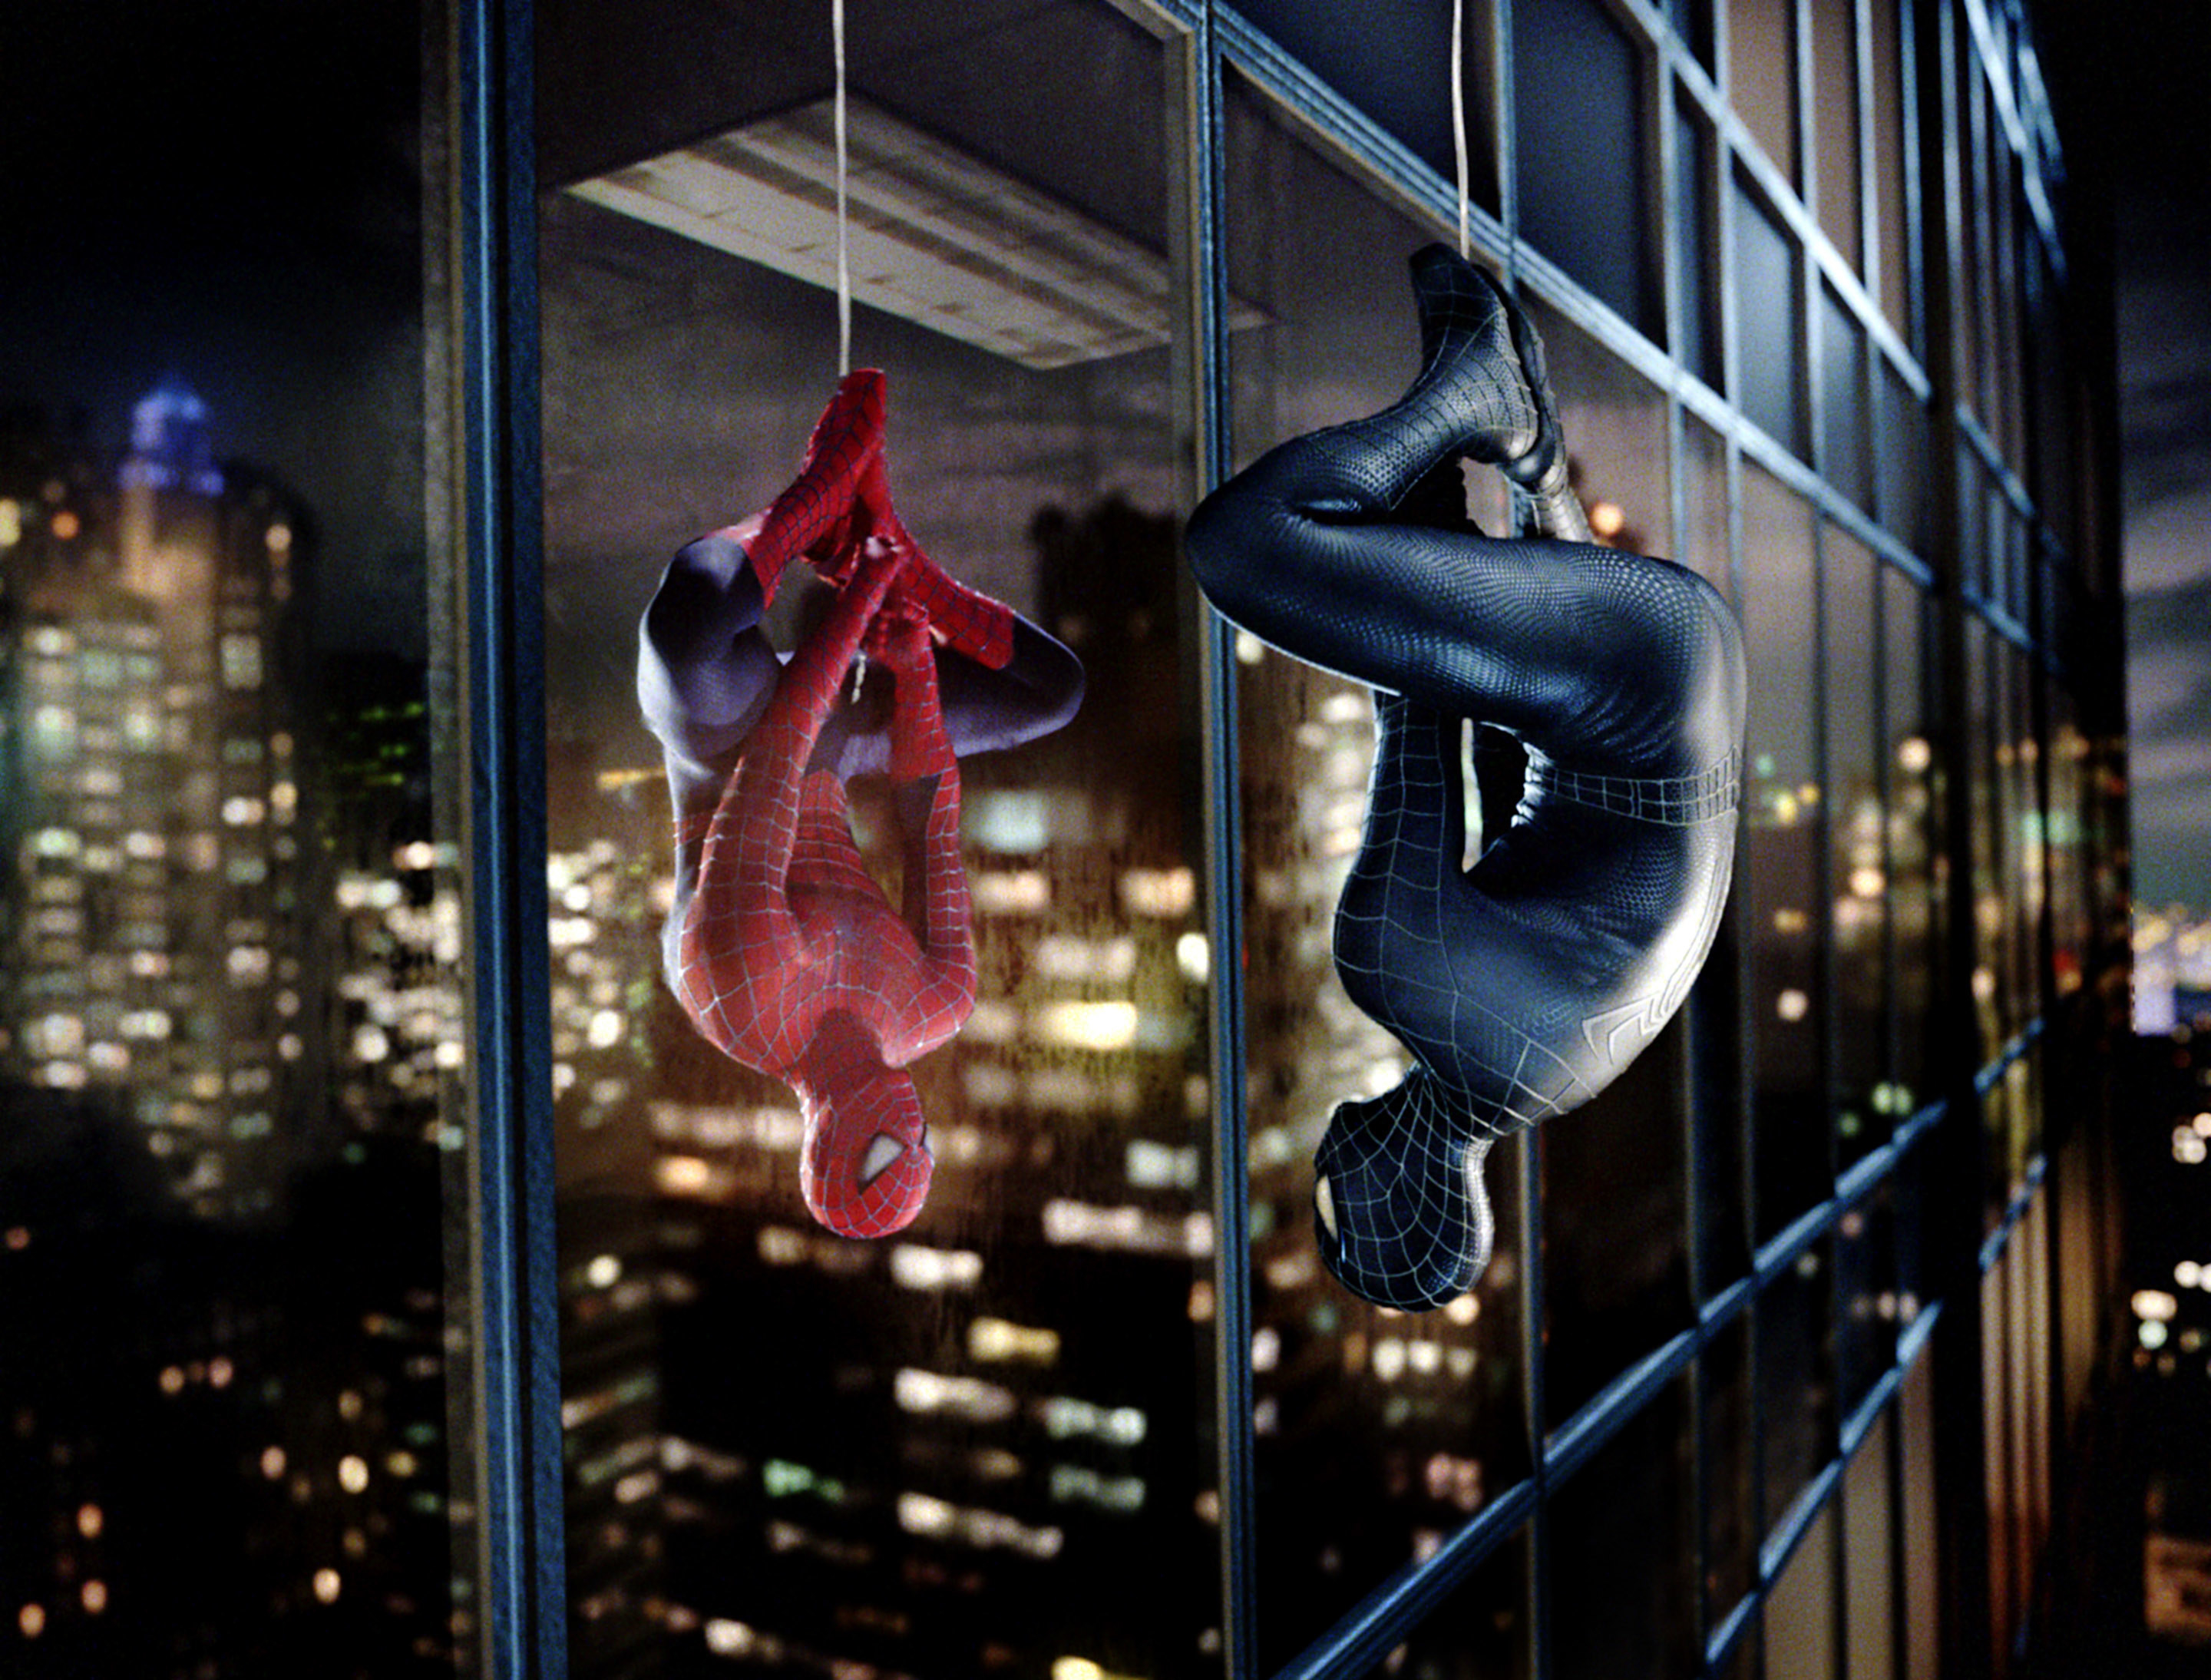 Spider-Man in an all black version of his suit hangs upside down from a building with his reflection showing the traditional red version of the suit